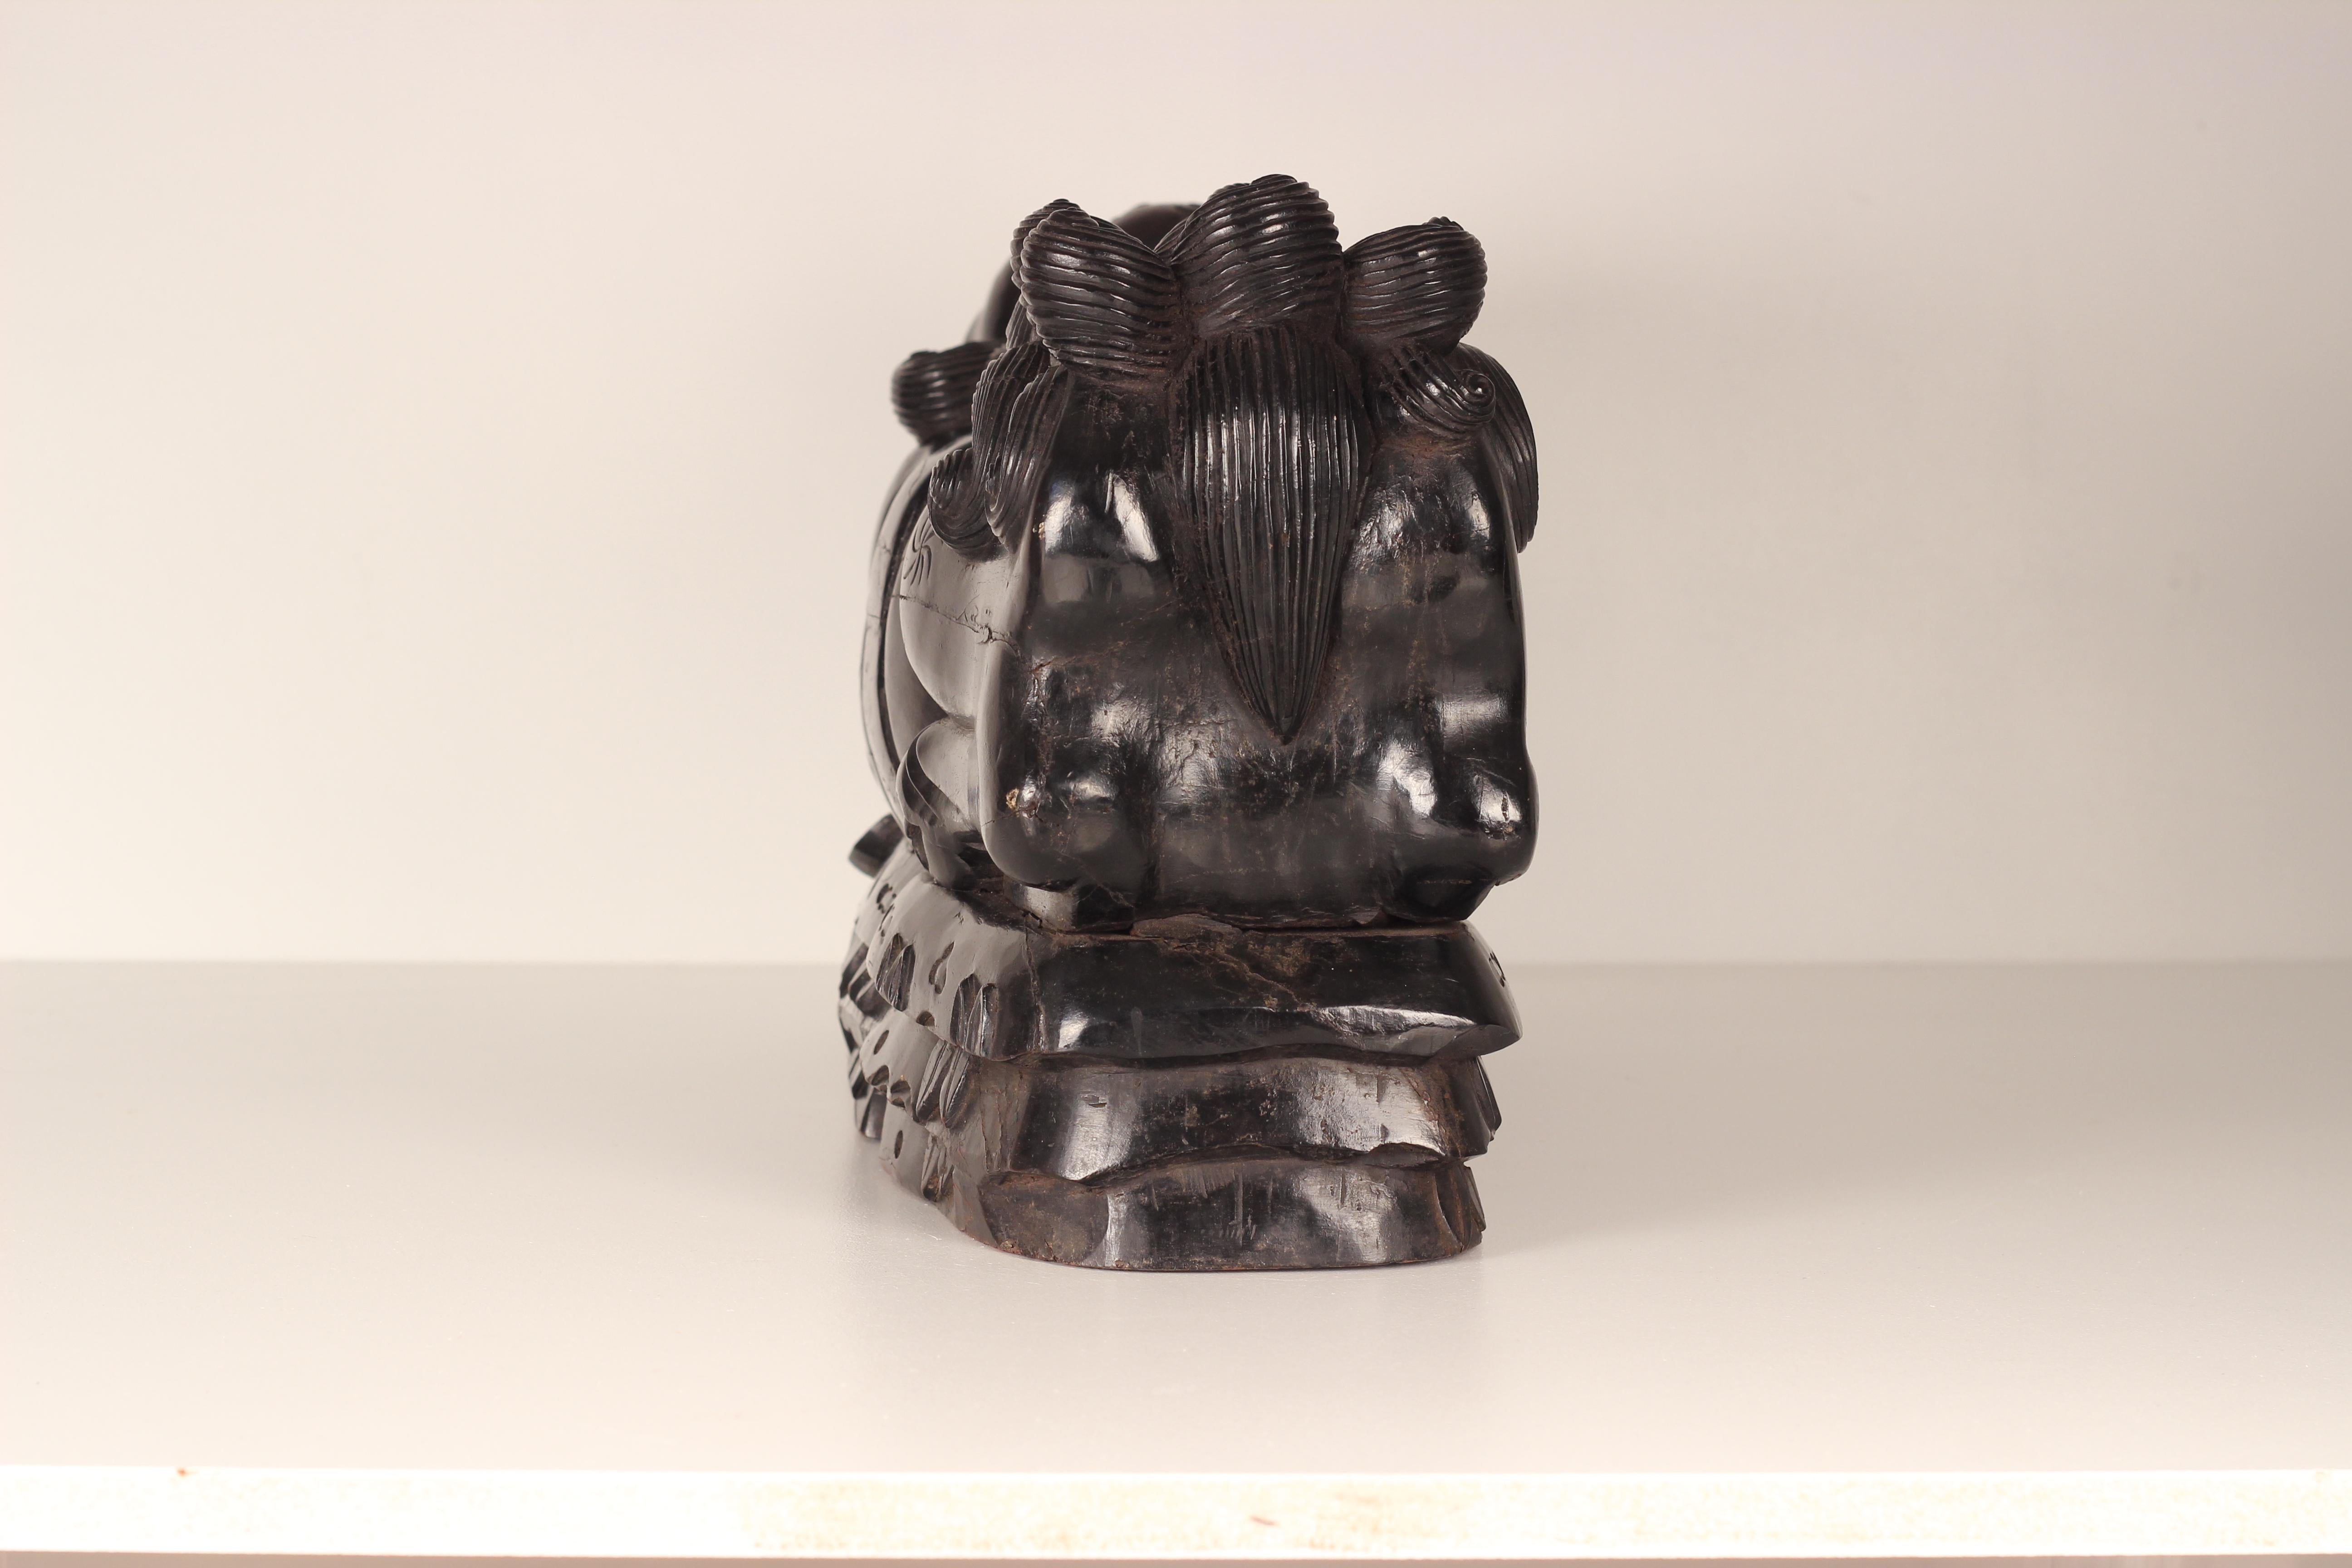 Chinese guardian lions, or imperial guardian lions, are a traditional Chinese architectural ornament. Typically made of stone, they are also known as stone lions or shishi (石獅; shíshī). They are known in colloquial English as lion dogs or foo dogs /